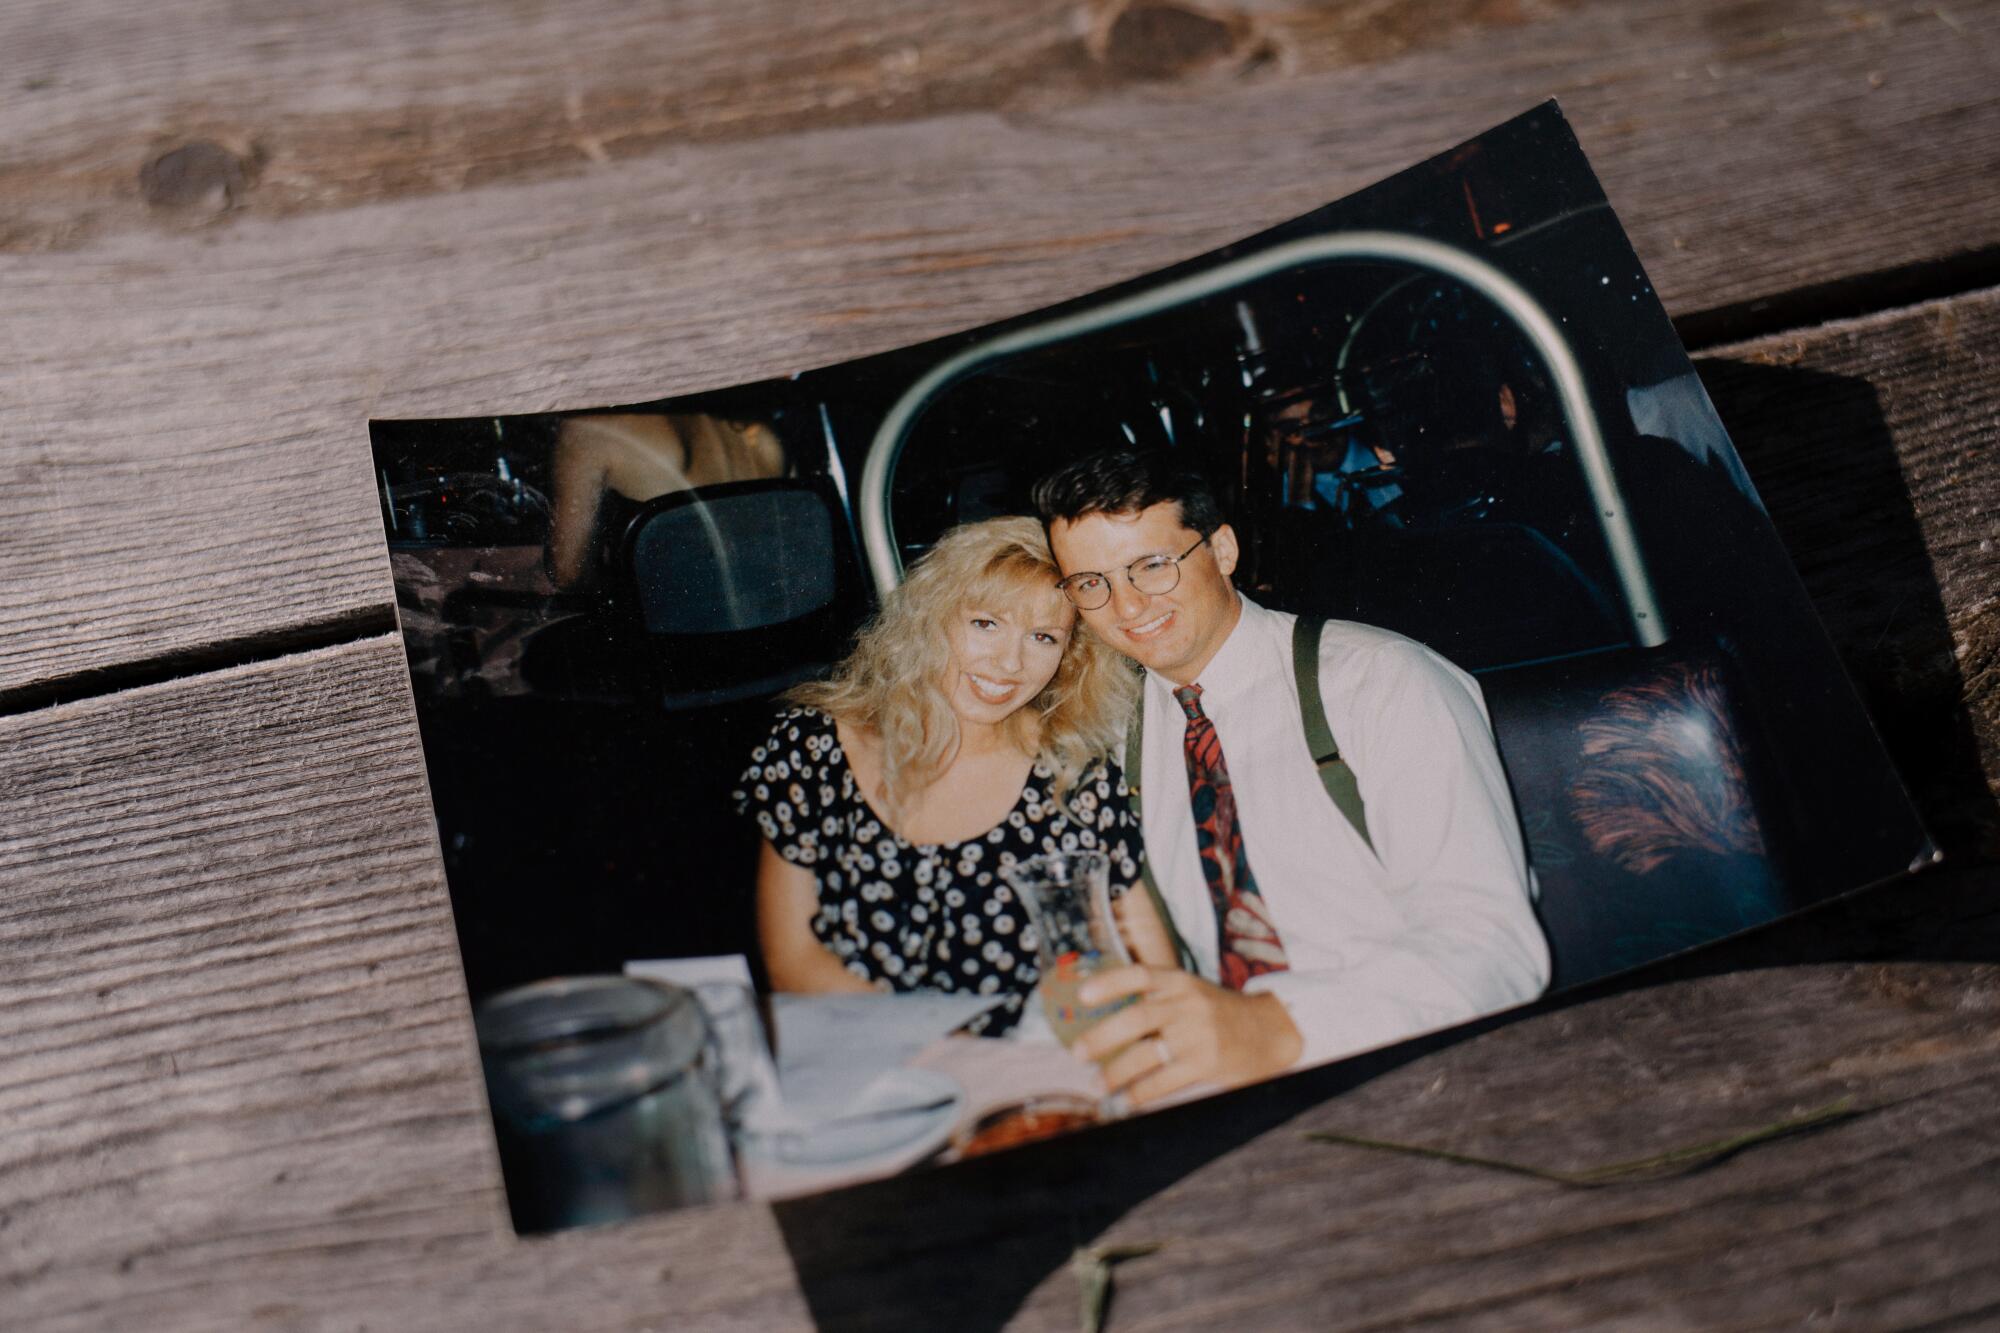 An archival photograph of Tasha Adams during her honeymoon with Stewart Rhodes rests on a table.